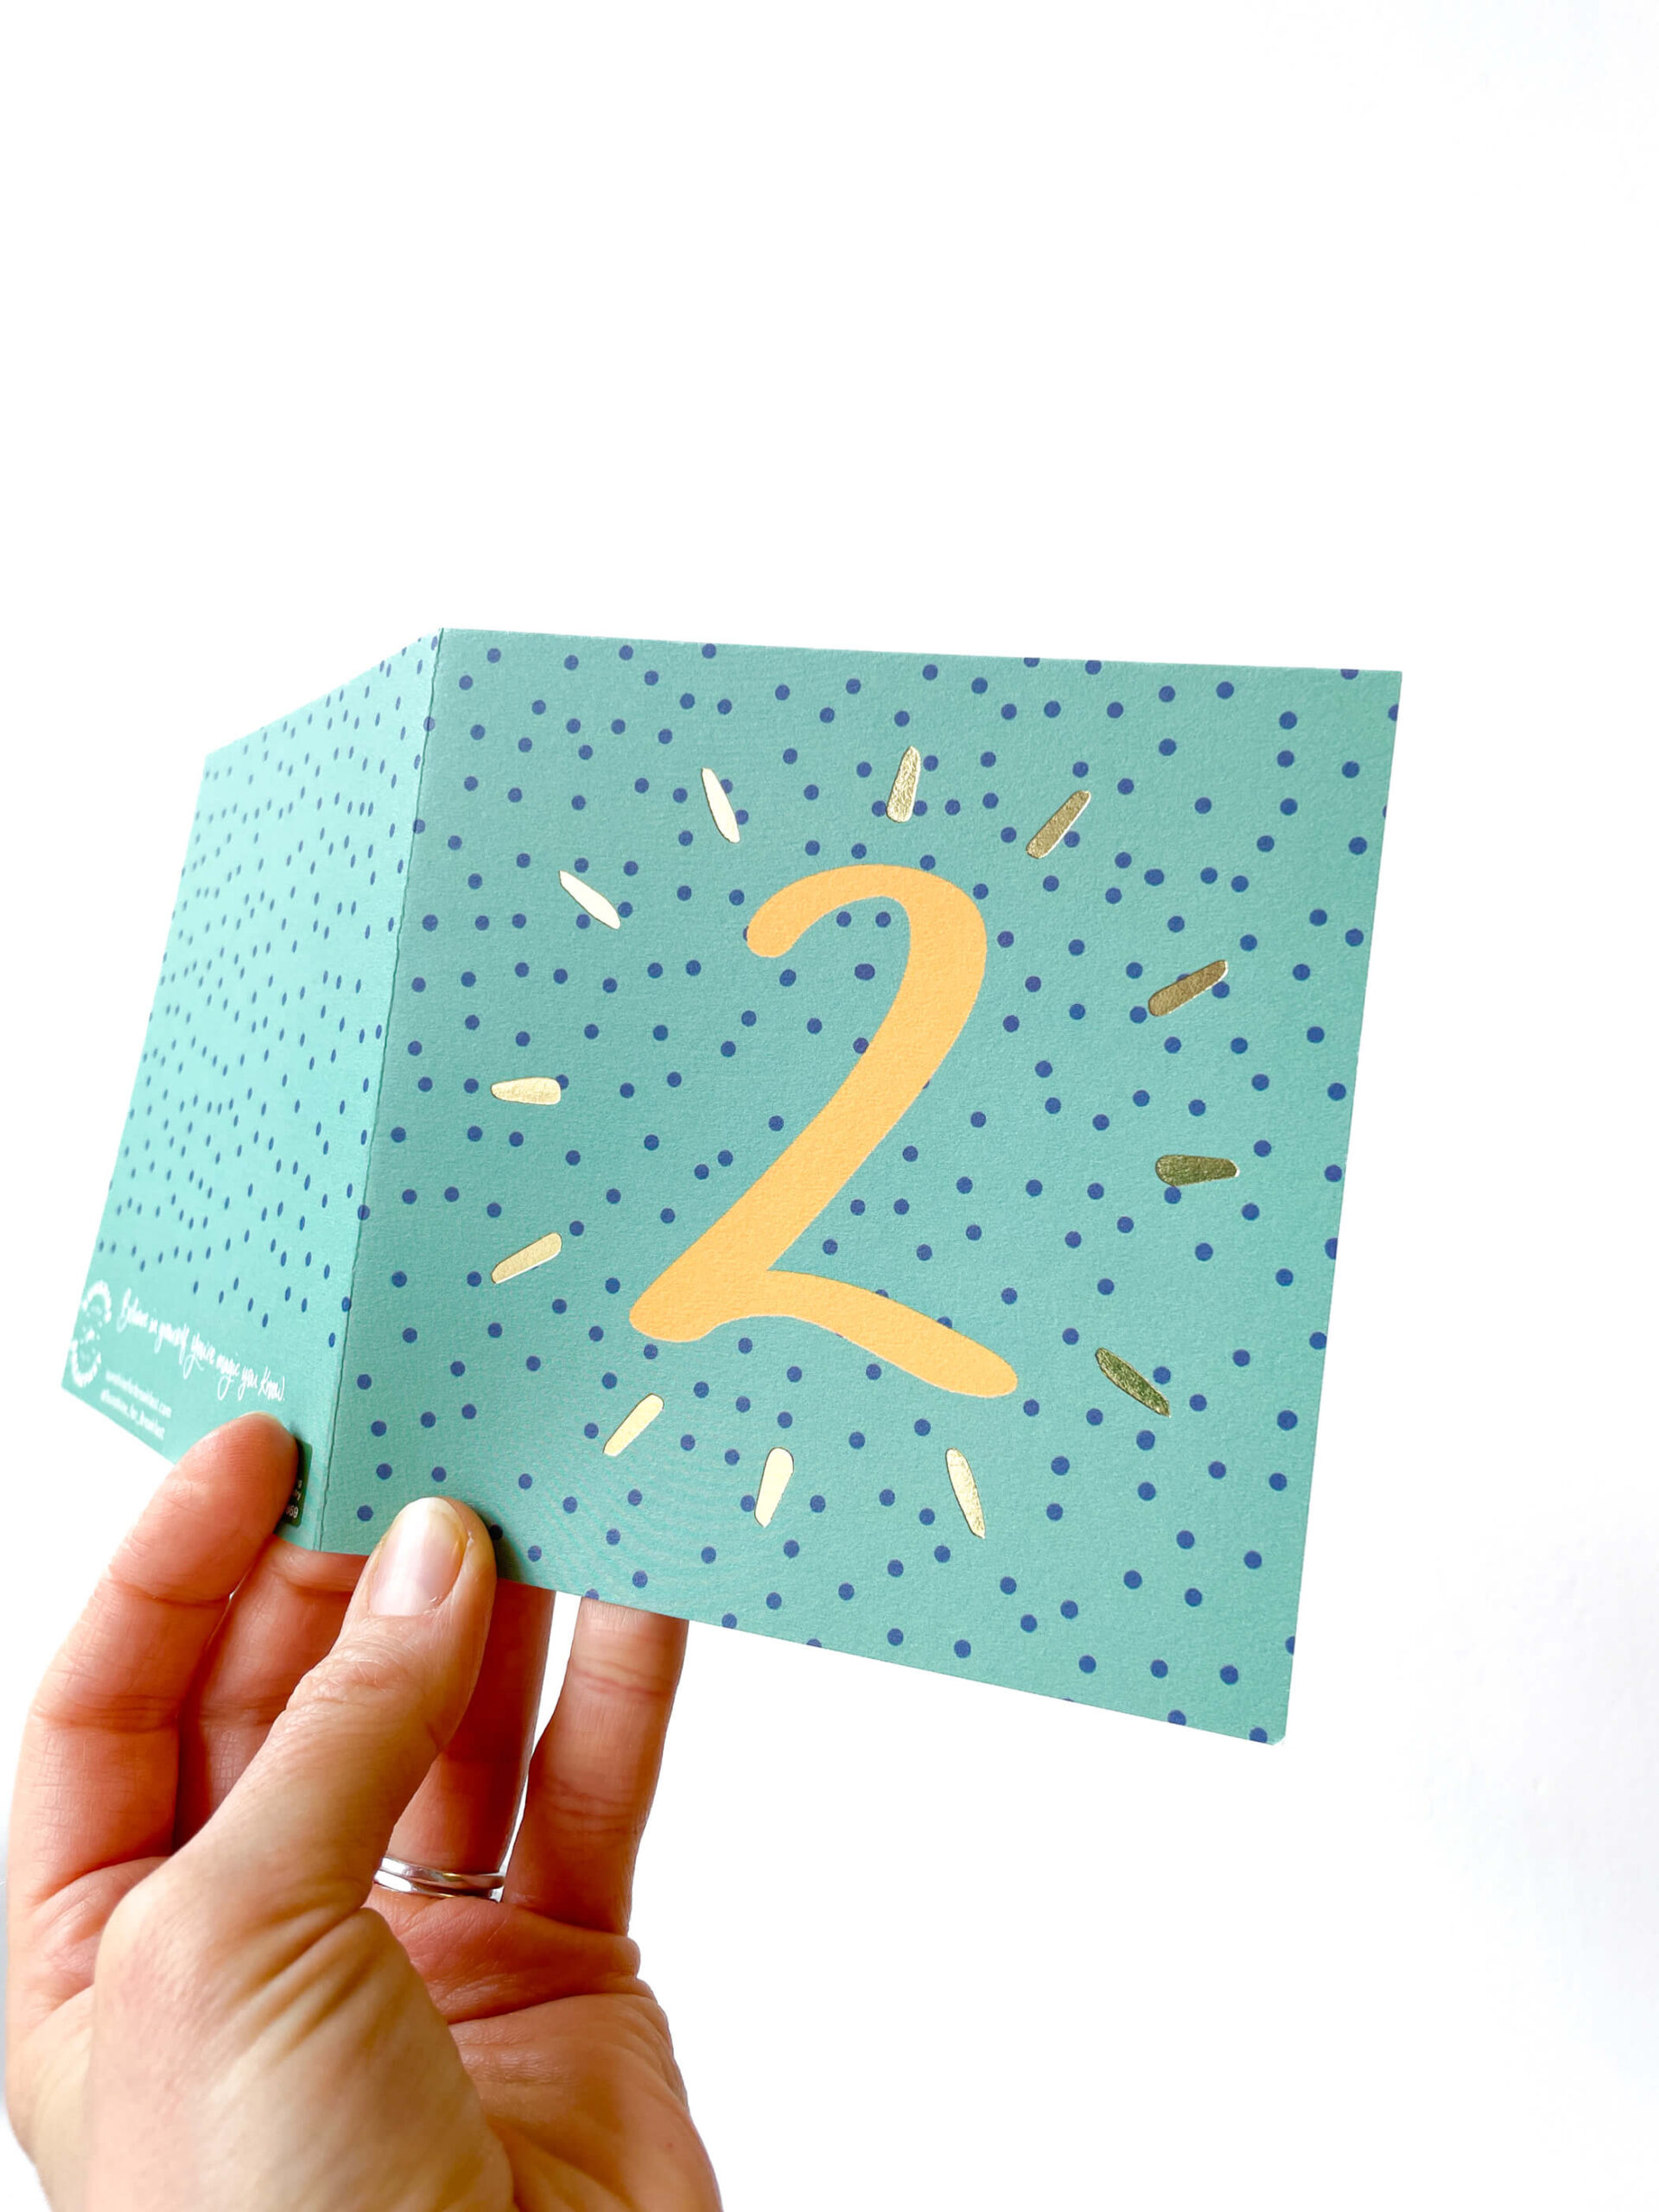 2nd birthday card - green and blue spotty design